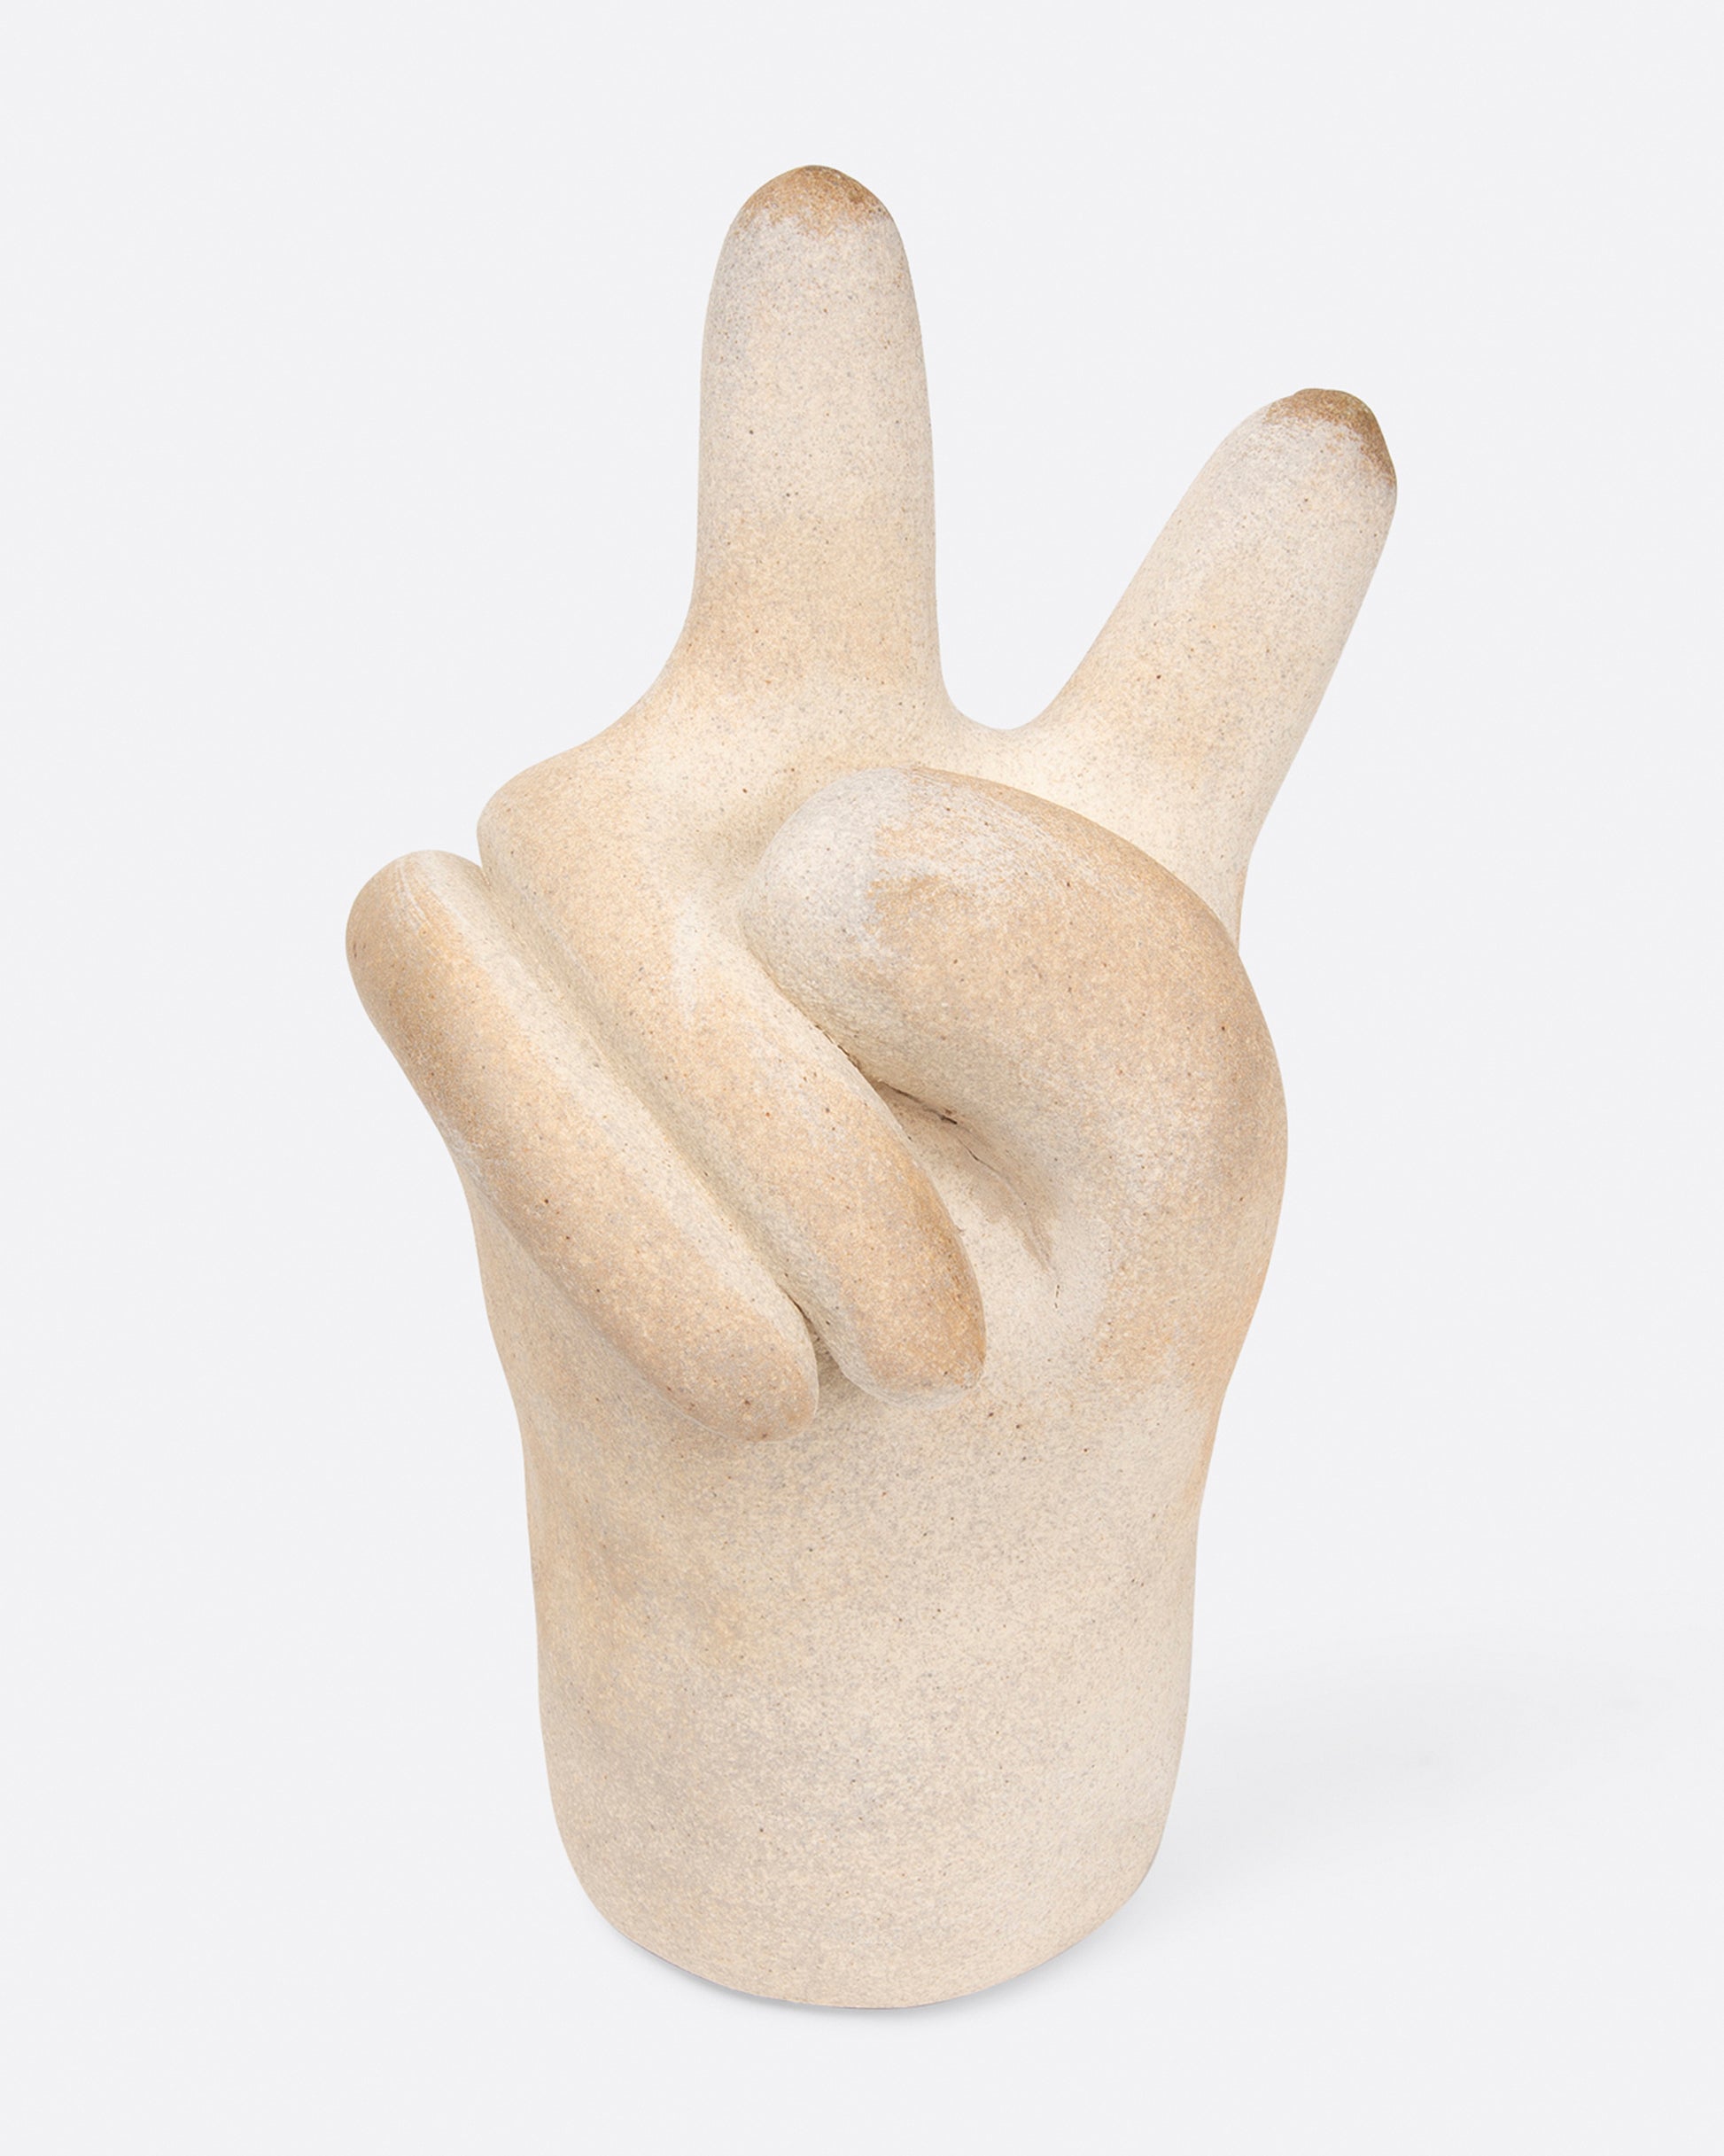 A large, off-white peace hand sculpture, shown from the front.